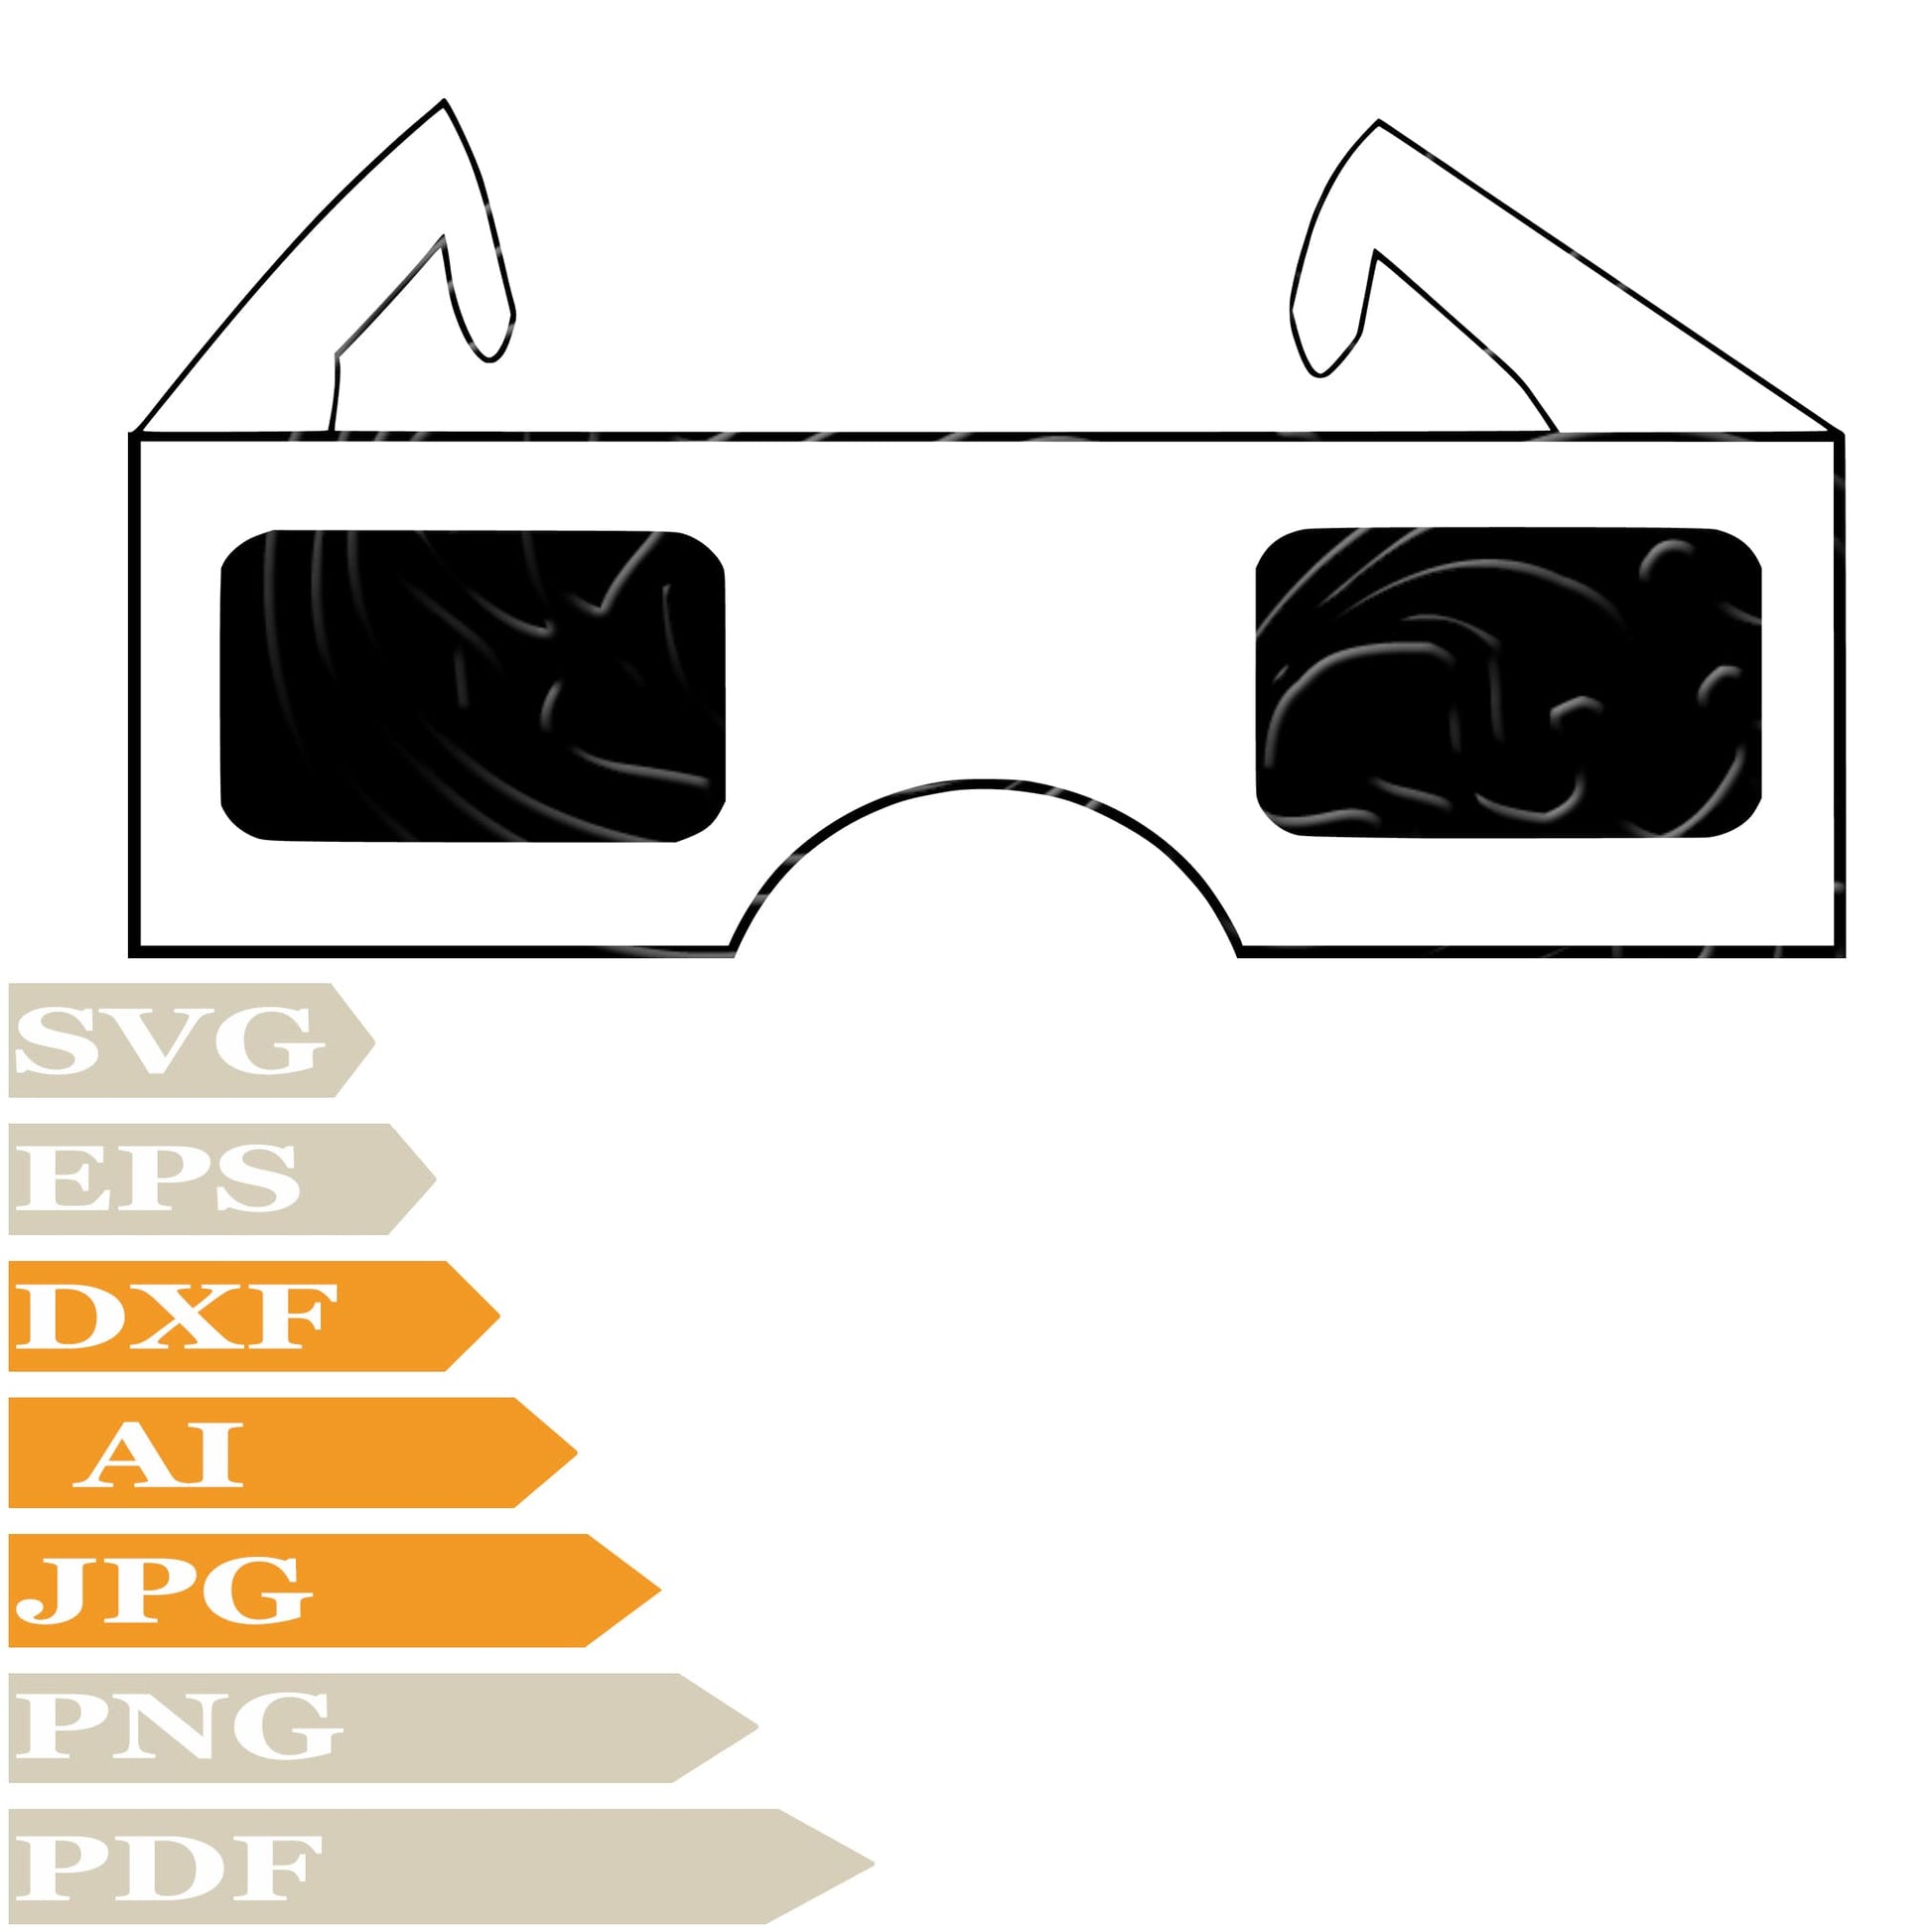 Glasses, 3D Glasses Svg File, Image Cut, Png, For Tattoo, Silhouette, Digital Vector Download, Cut File, Clipart, For Cricut